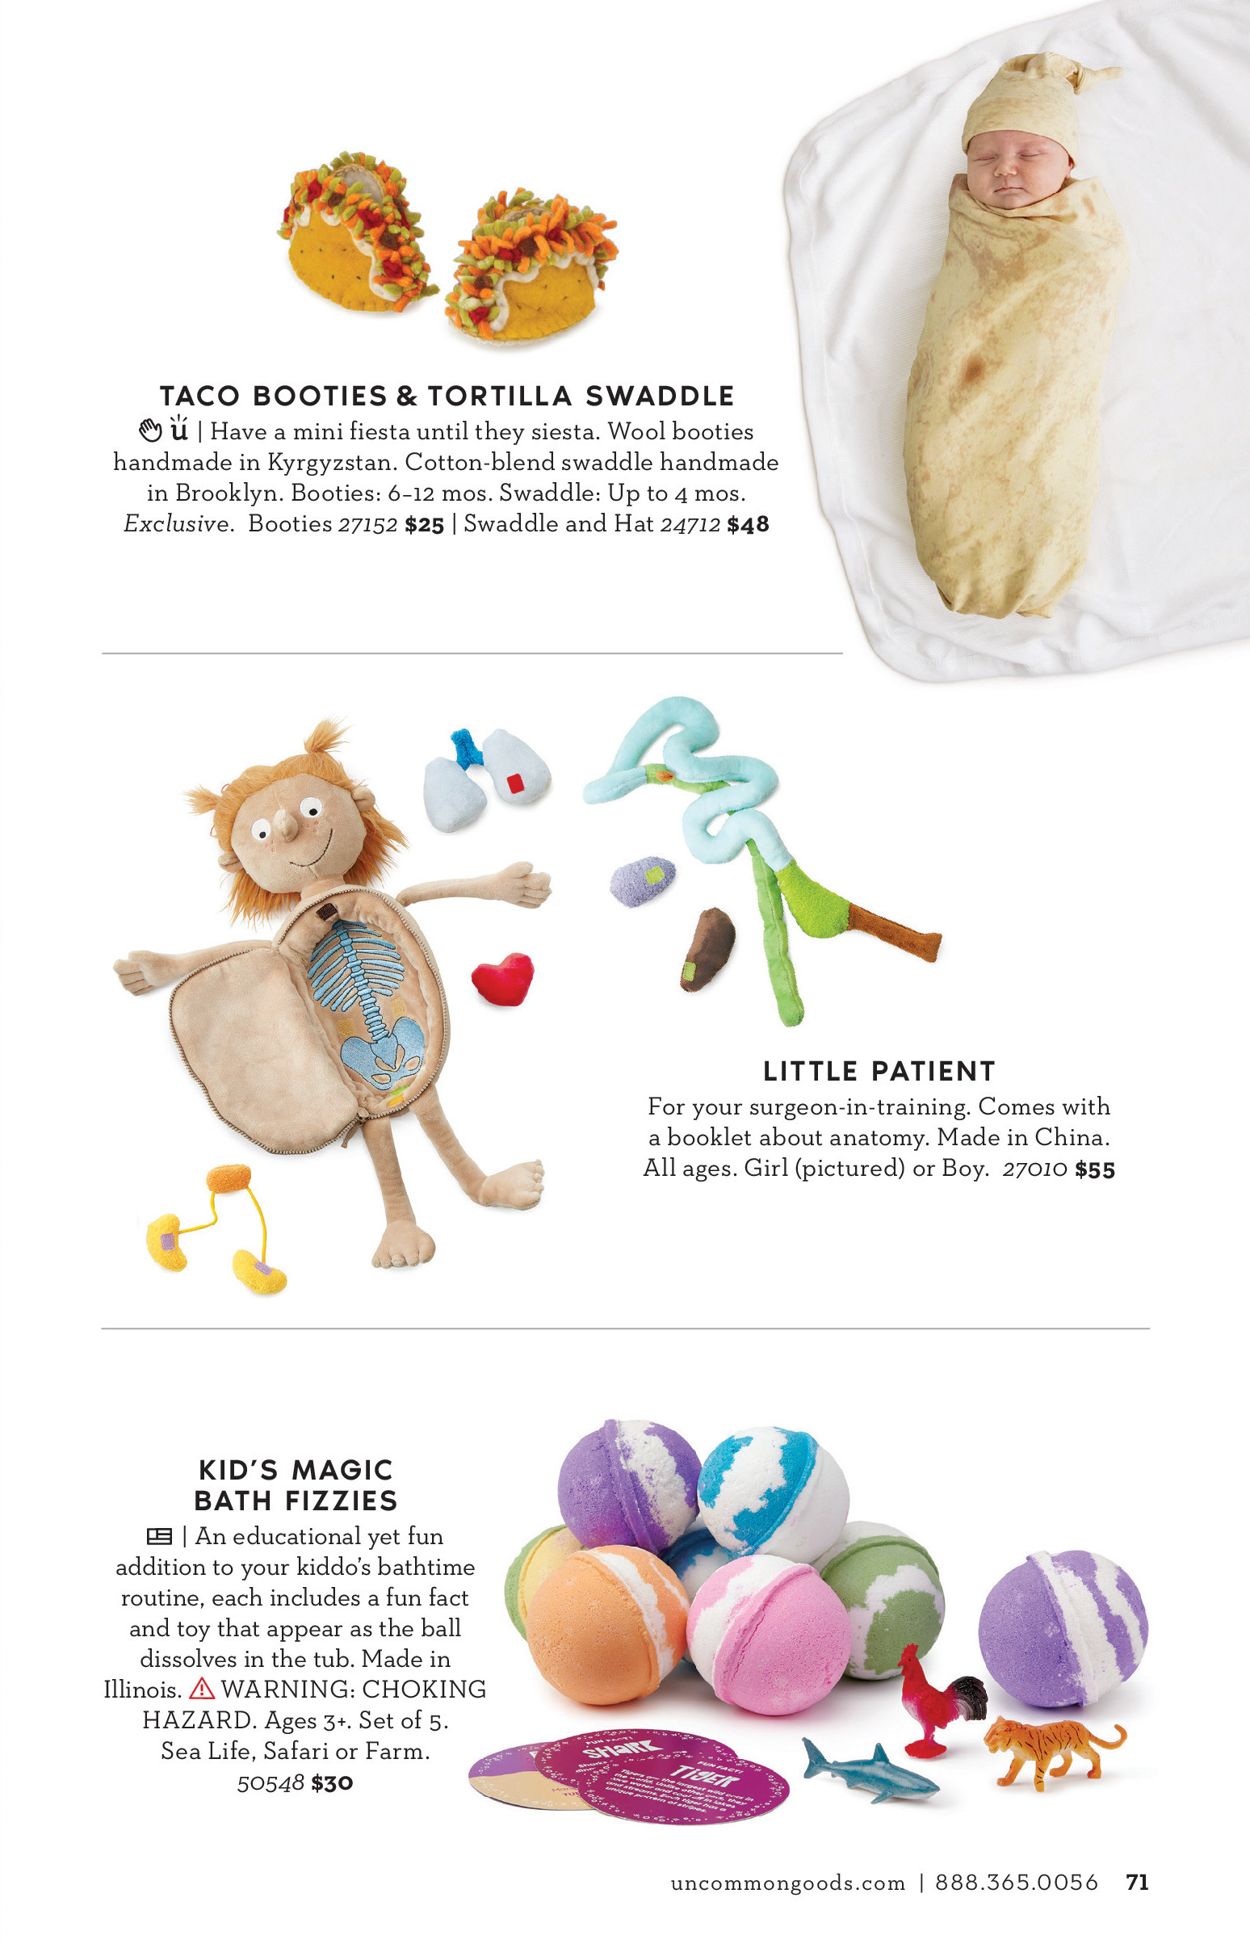 tortilla swaddle and taco booties